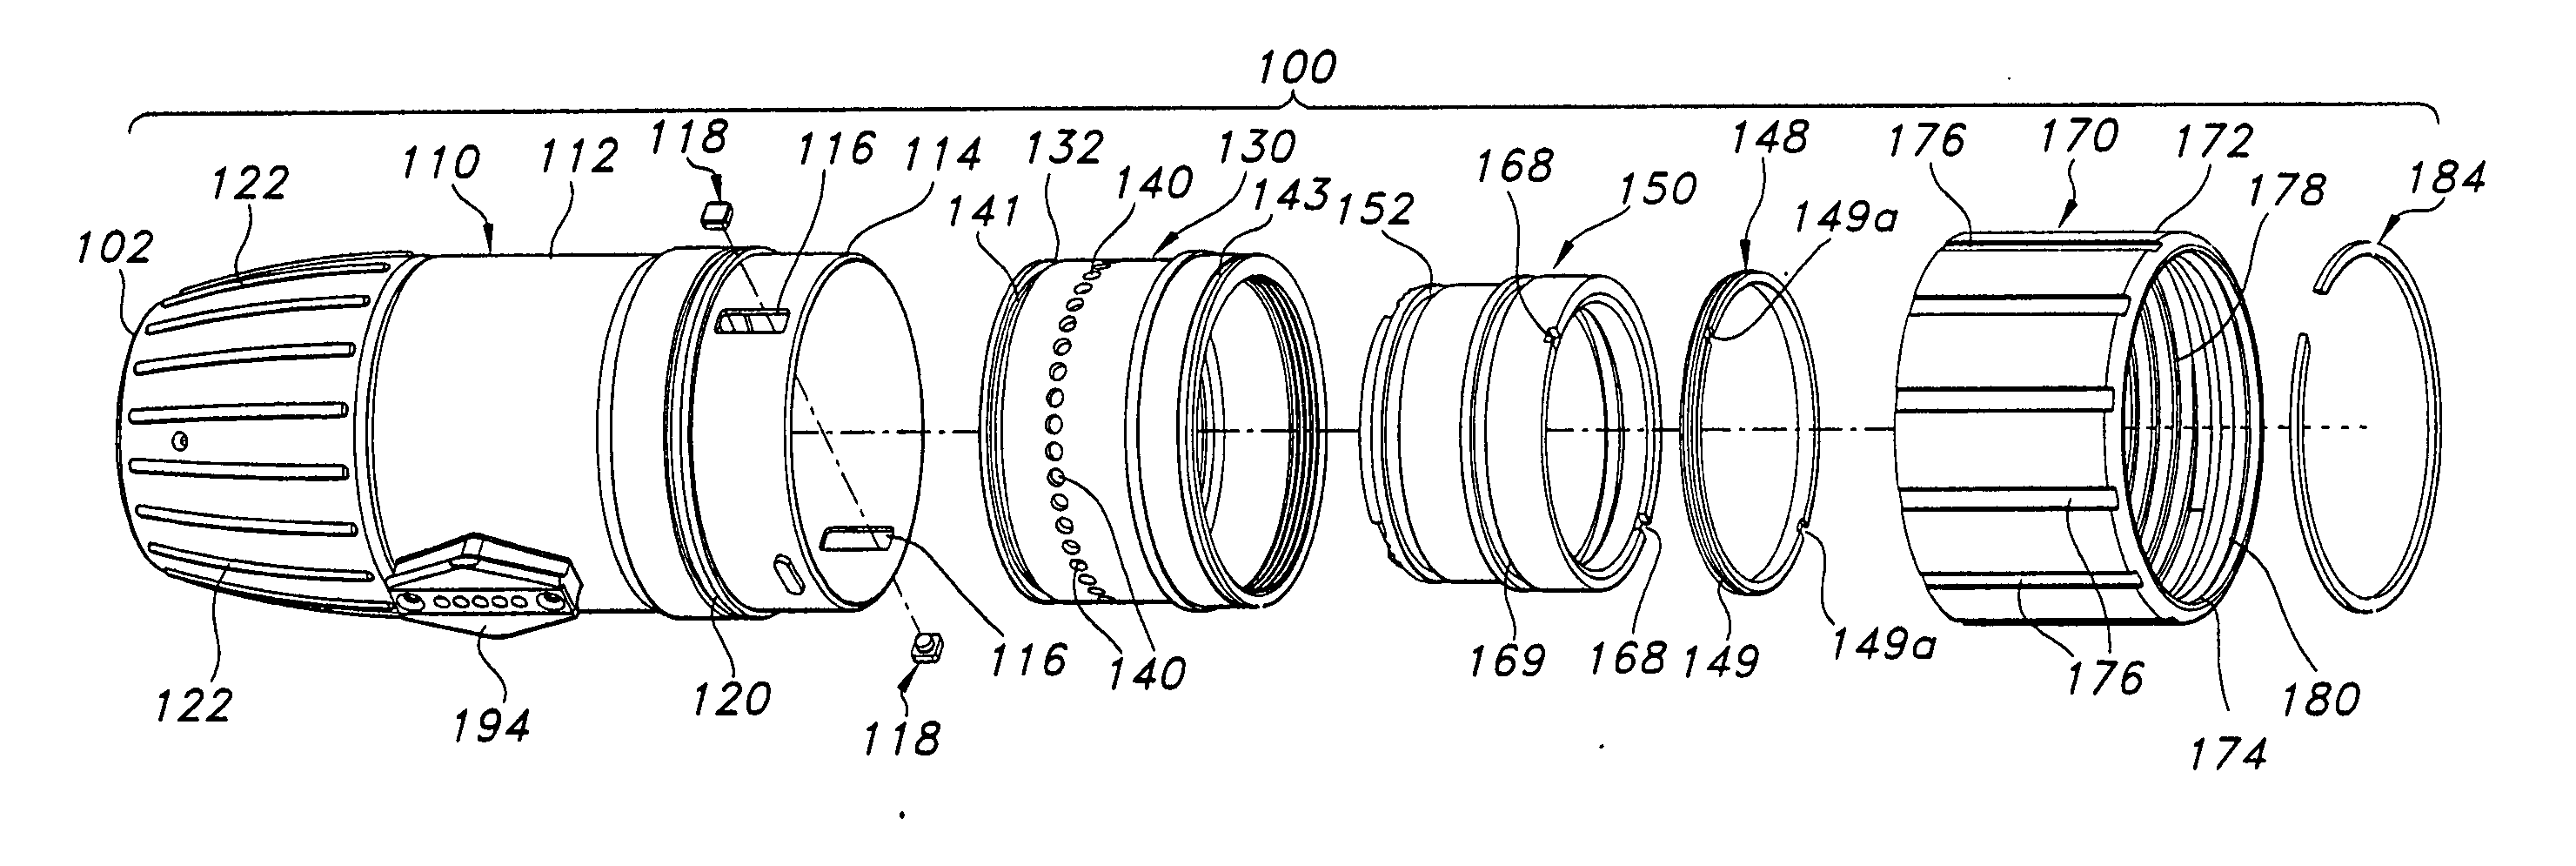 Collimated optical system